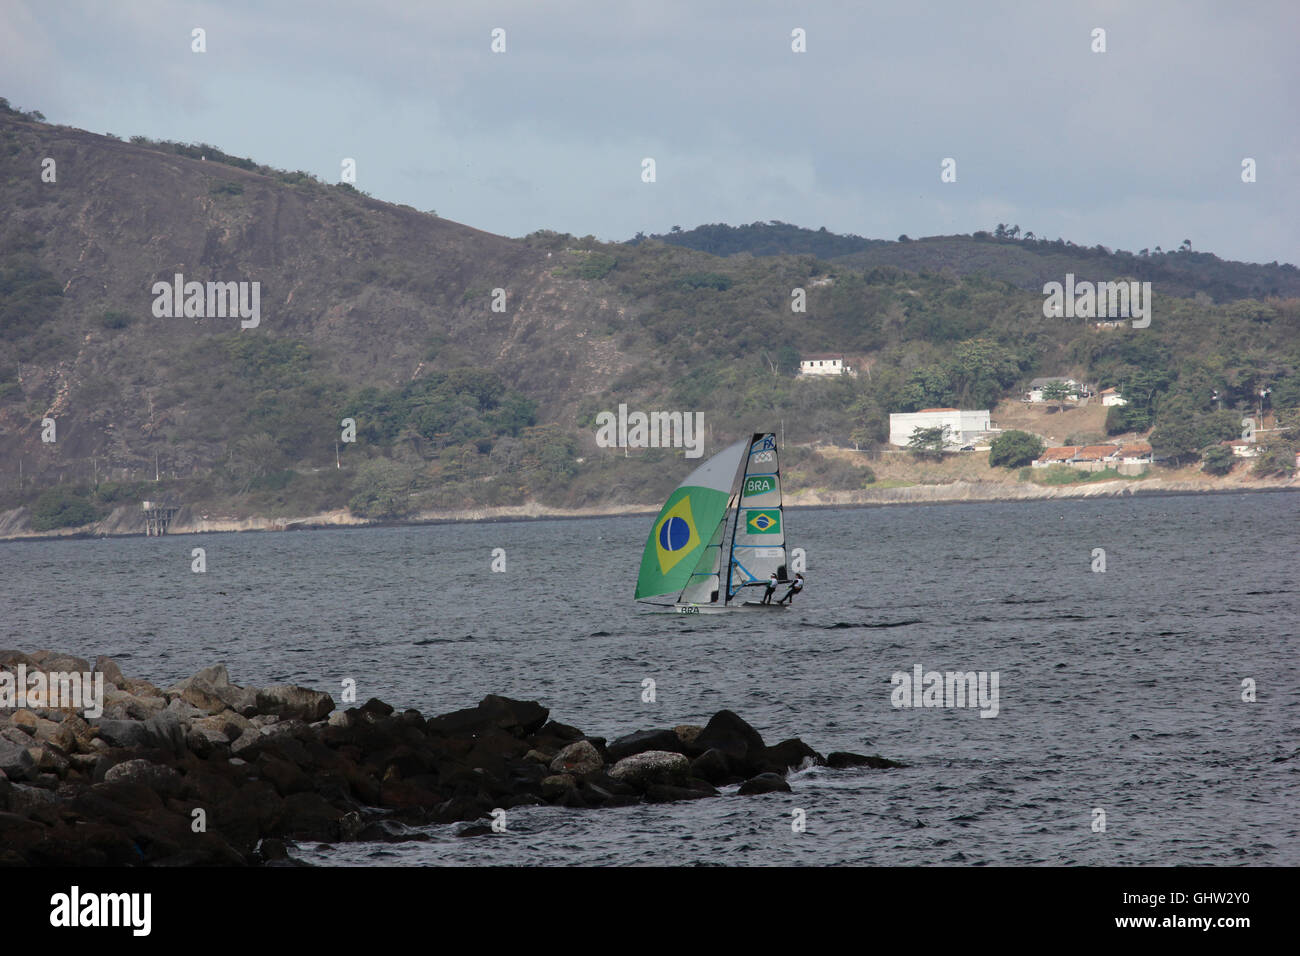 Rio de Janeiro, Brazil. 11th August 2016. Athletes from different countries take part in the sailing competitions for the 2016 Olympic Games, in the waters of Guanabara Bay, in Rio de Janeiro. Popular enjoy the Gloria Marina to the waterfront to watch the competitions without buying tickets. Credit:  Luiz Souza/Alamy Live News Stock Photo